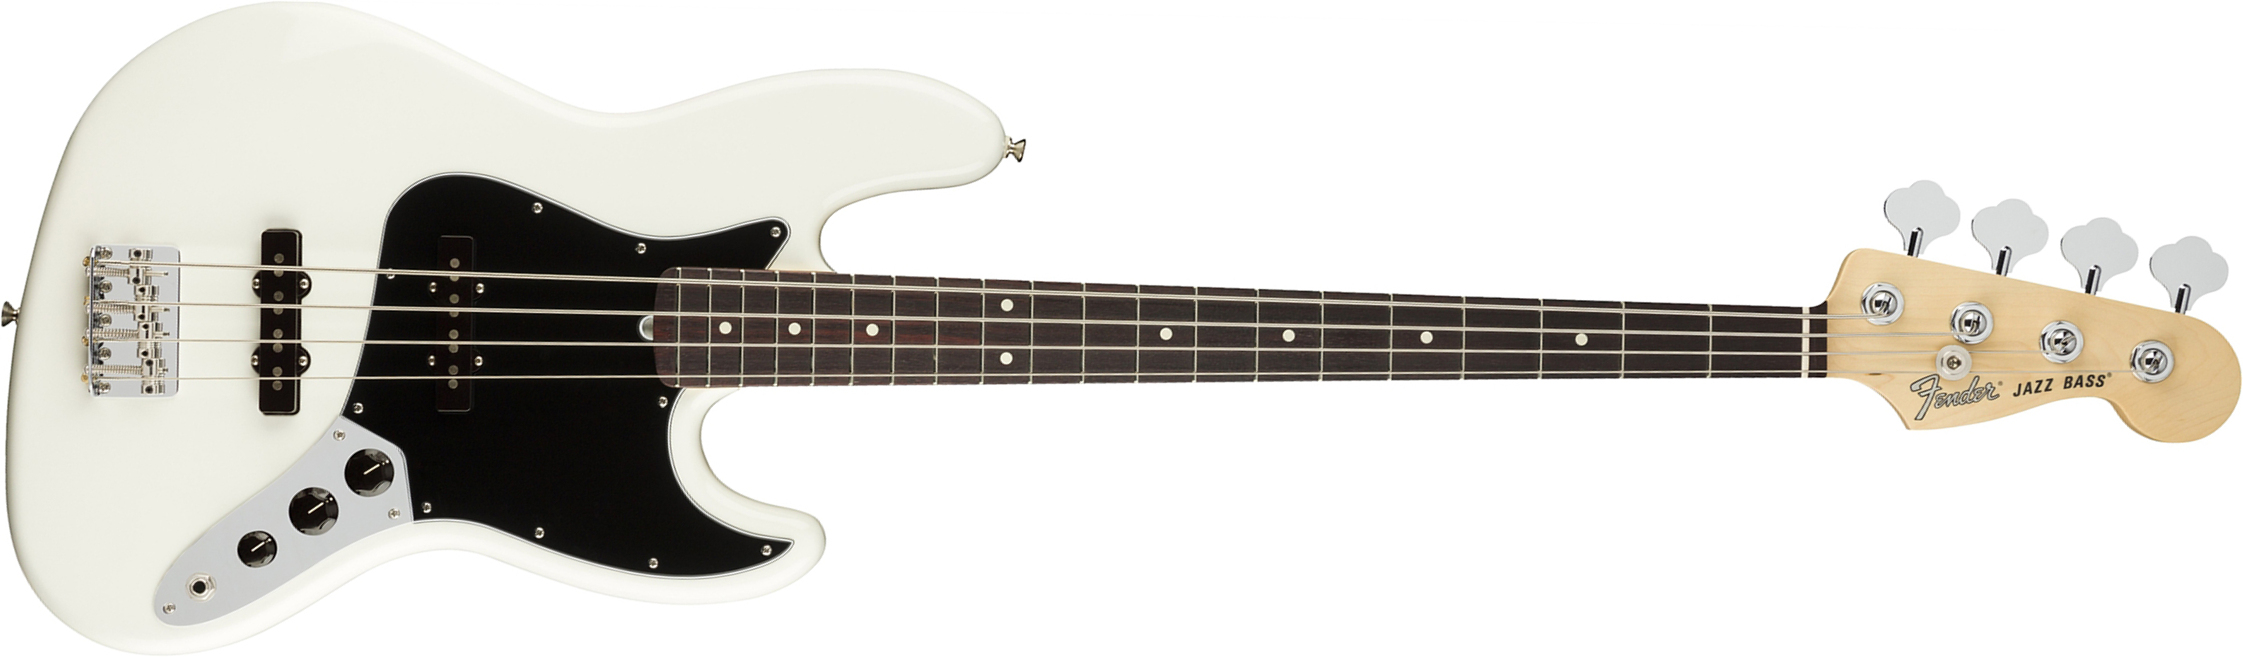 Fender Jazz Bass American Performer Usa Rw - Arctic White - Solid body electric bass - Main picture